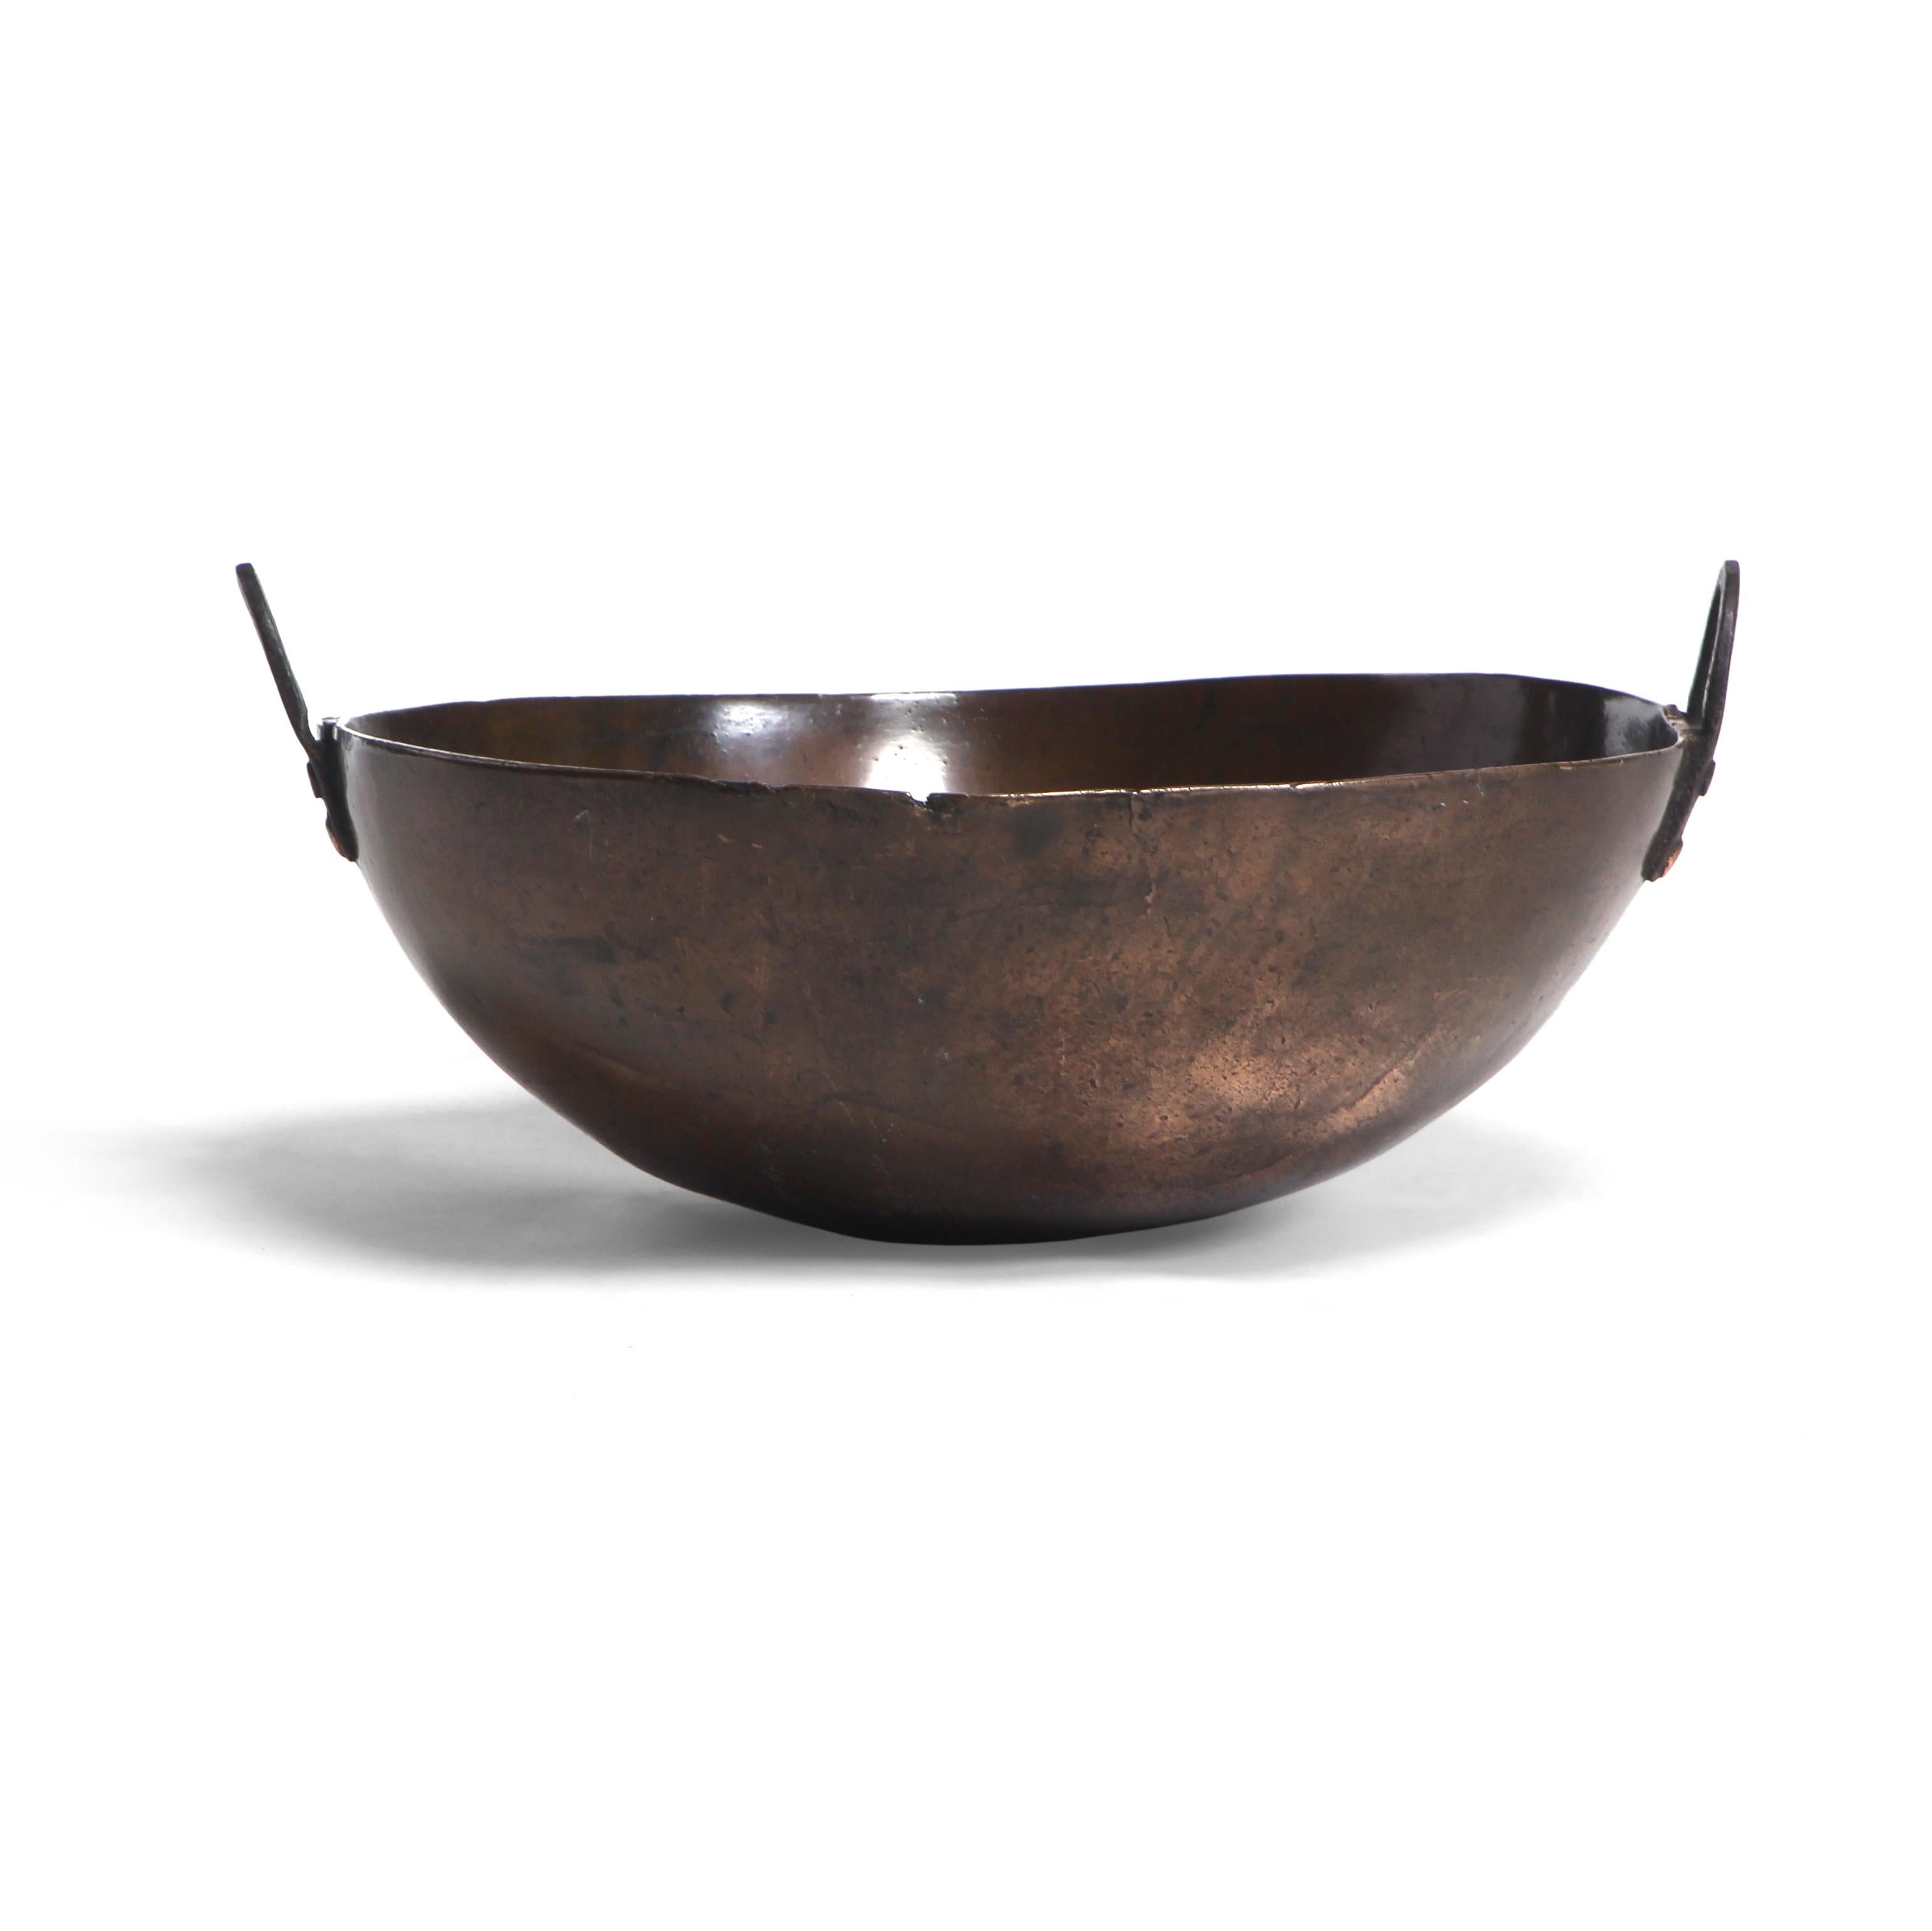 An antique bronze bowl with a rich patina and riveted iron handles.